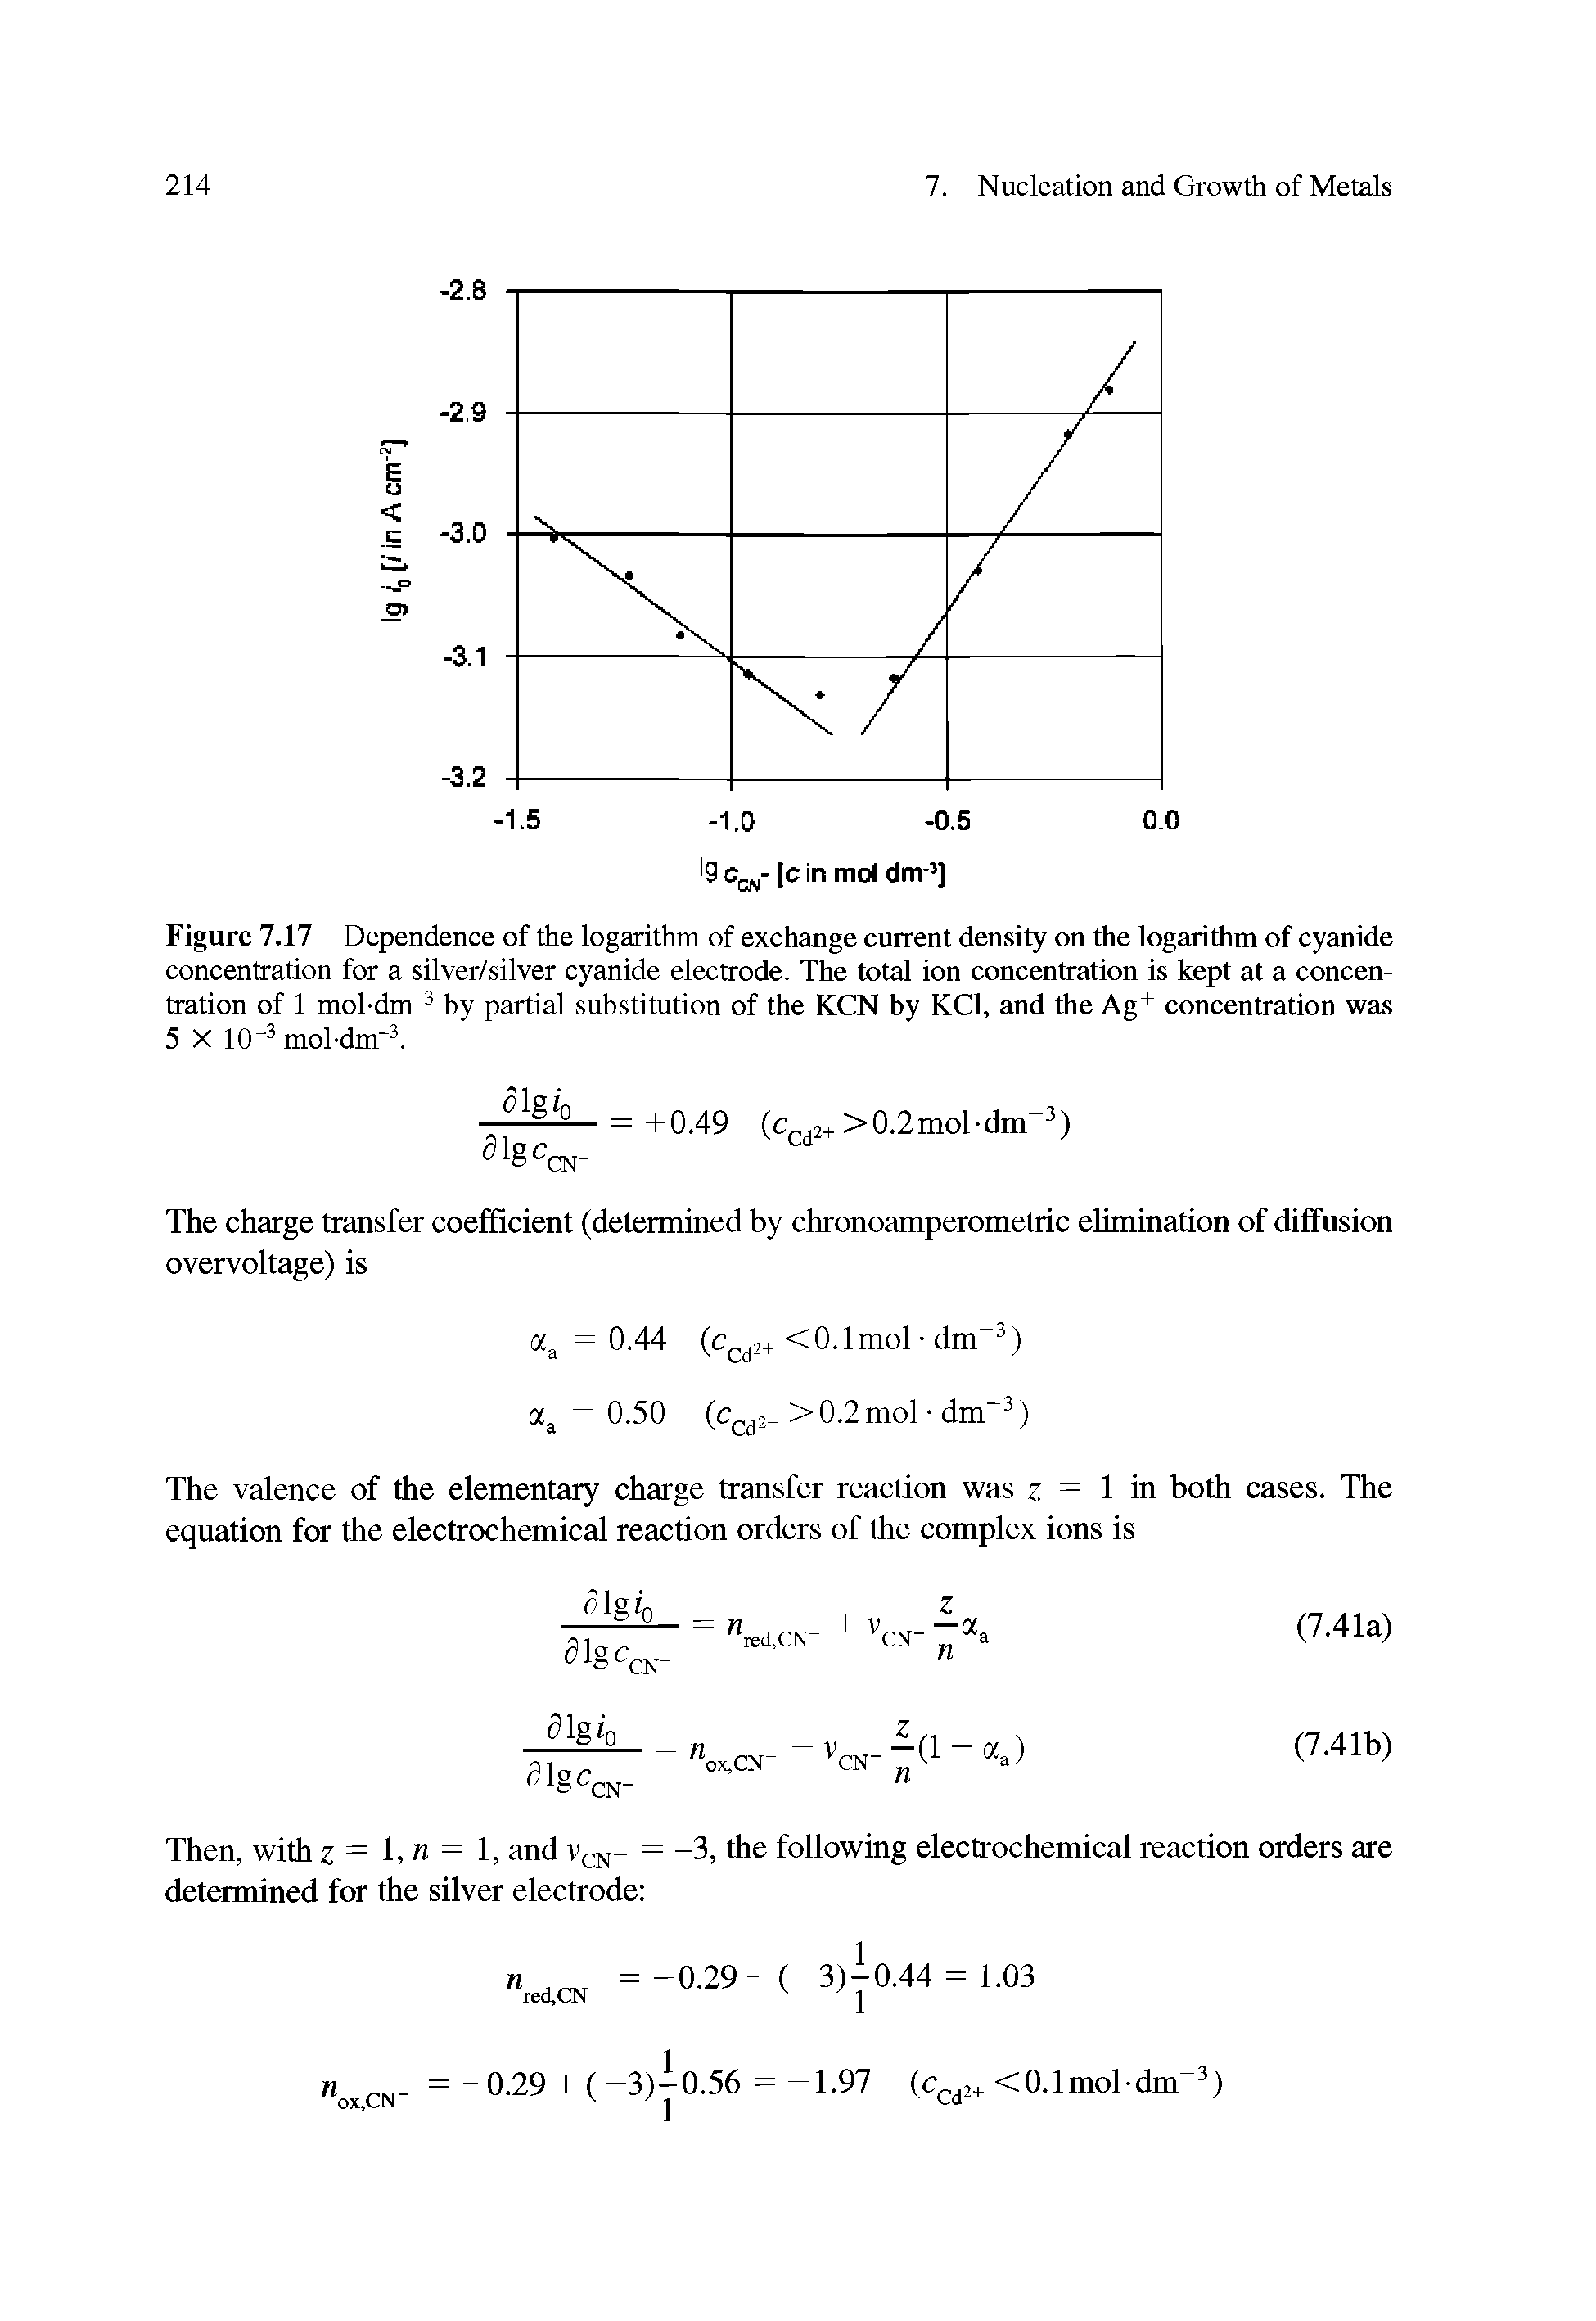 Figure 7.17 Dependence of the logarithm of exchange current density on the logarithm of cyanide concentration for a silver/silver cyanide electrode. The total ion concentration is kept at a concentration of 1 mol dm hy partial substitution of the KCN by KCl, and the Ag+ concentration was 5 X 10 mohdm. ...